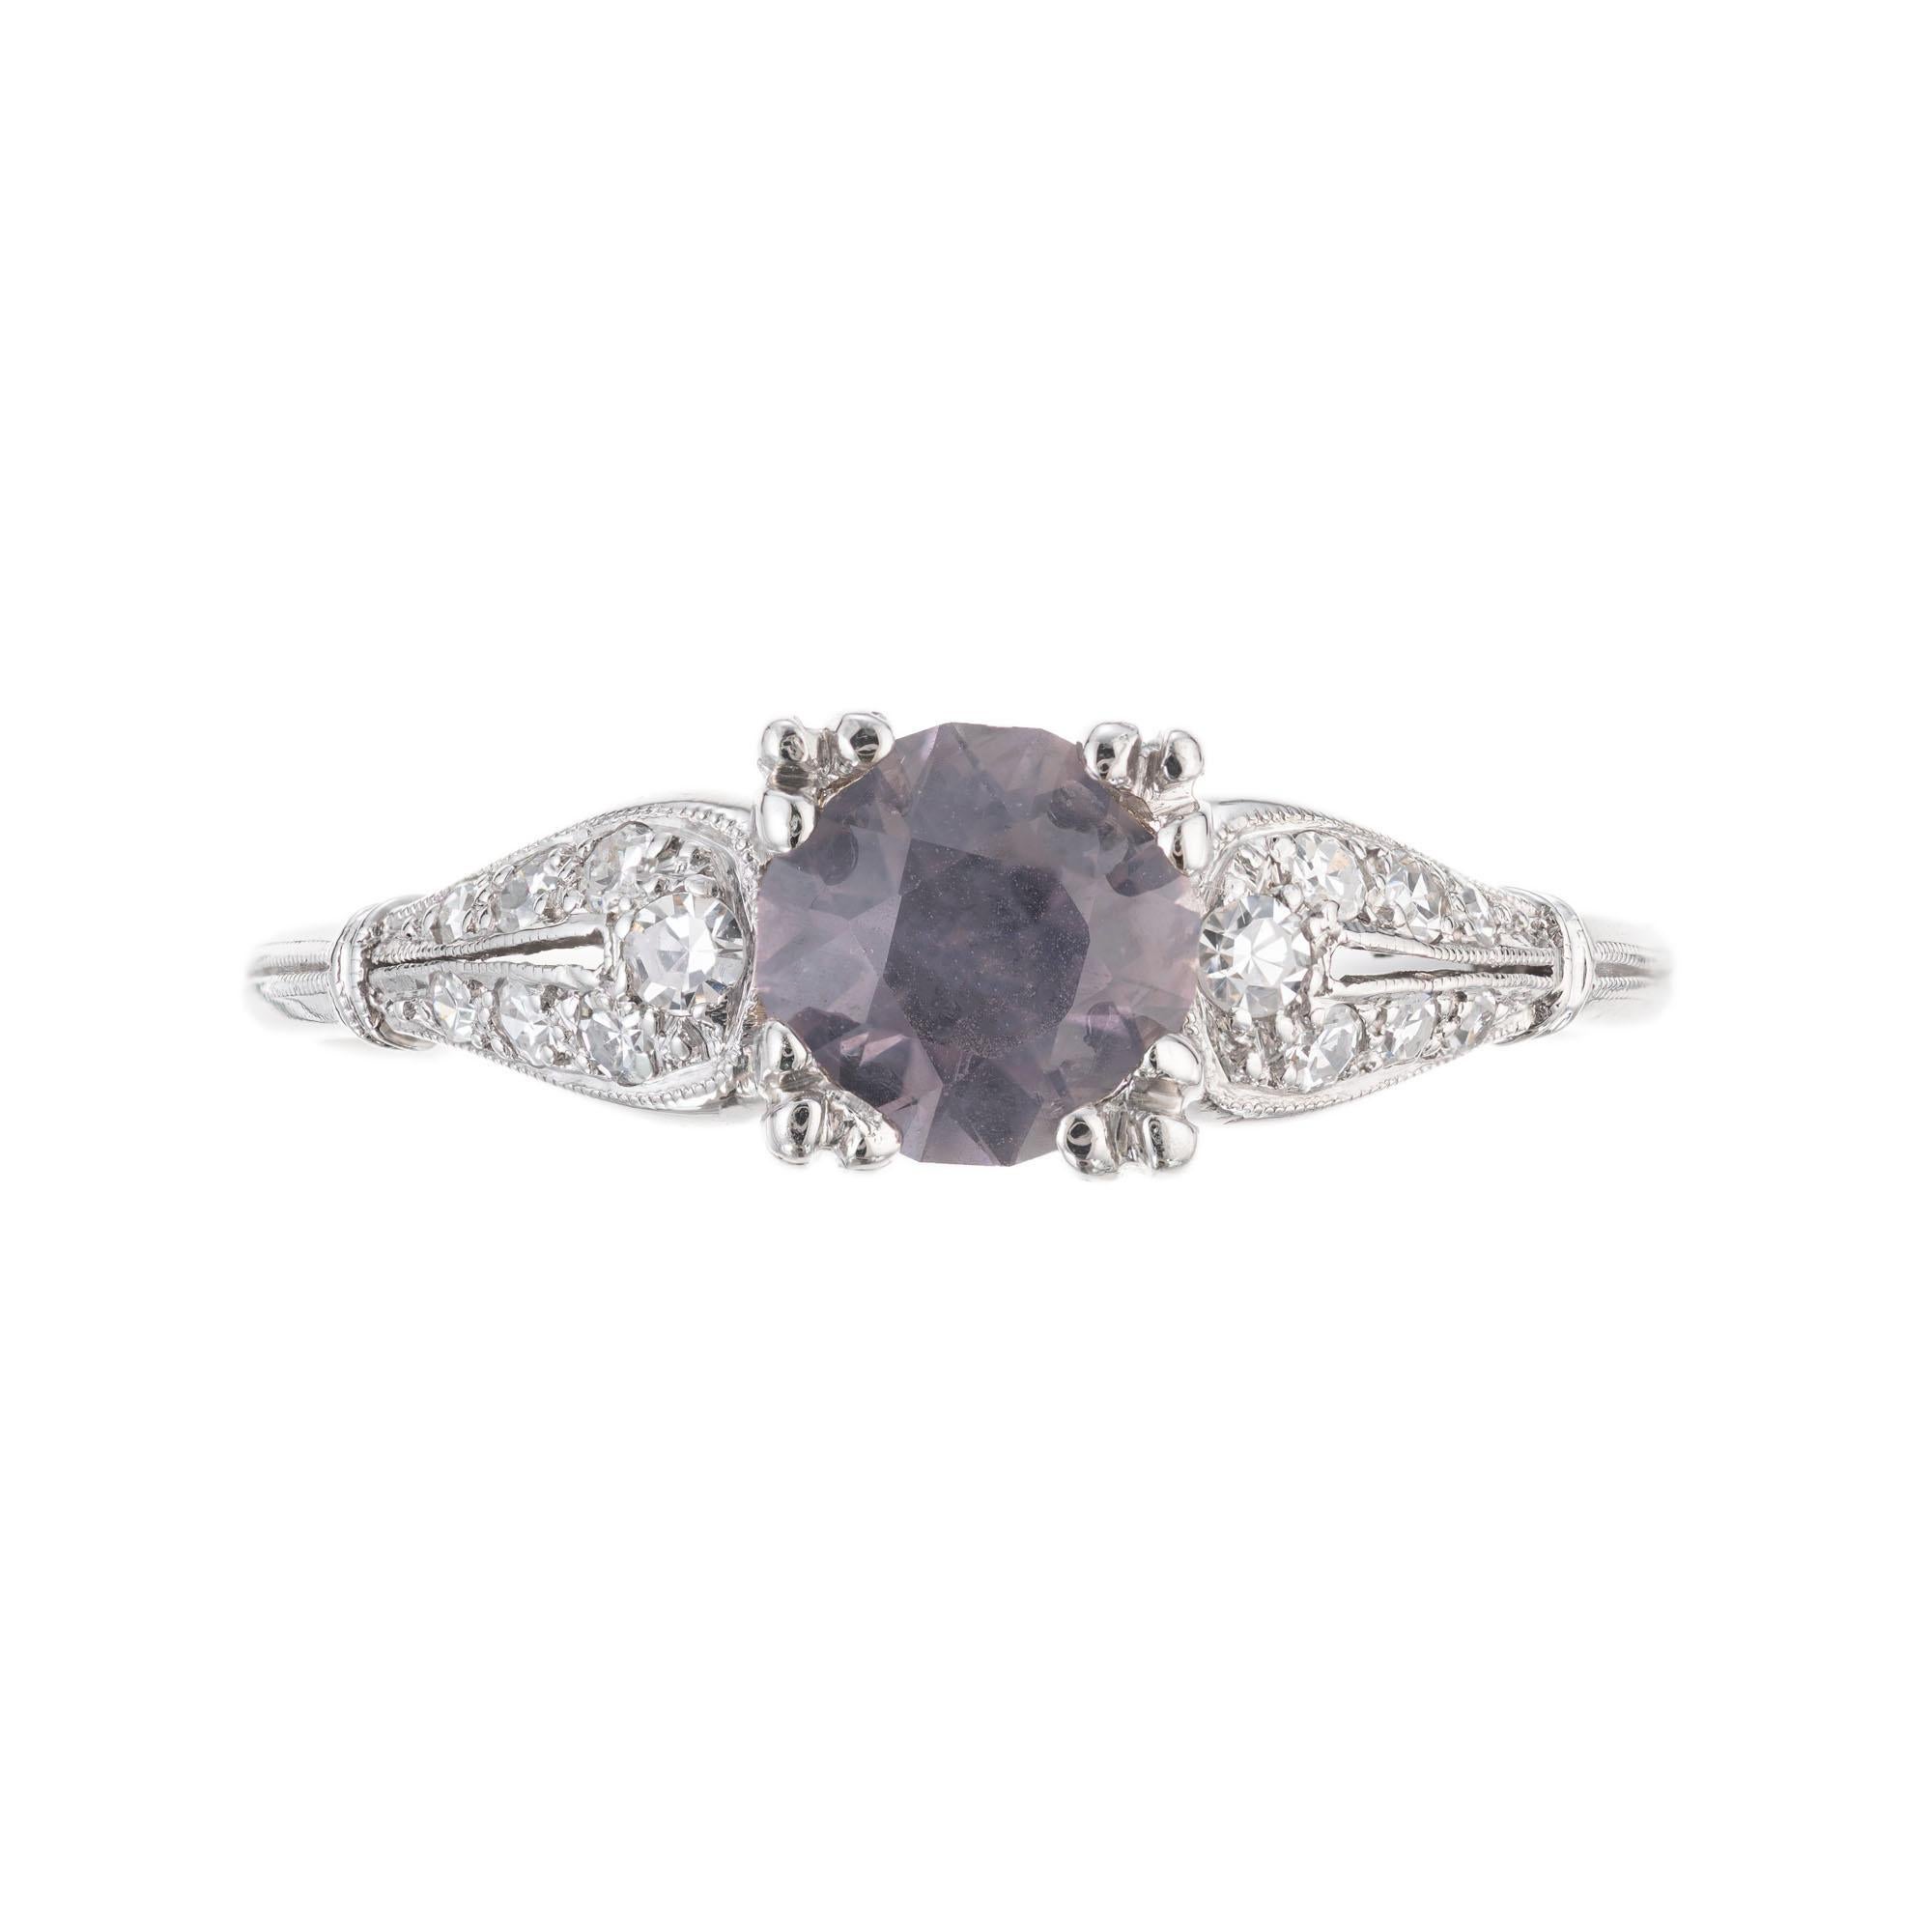 Light purple gray natural sapphire and diamond engagement ring. GIA certified round center sapphire in a handmade platinum setting with 14 round accent diamonds. circa 1940's. GIA certified natural no enhancements.

1 round purple gray sapphire, SI